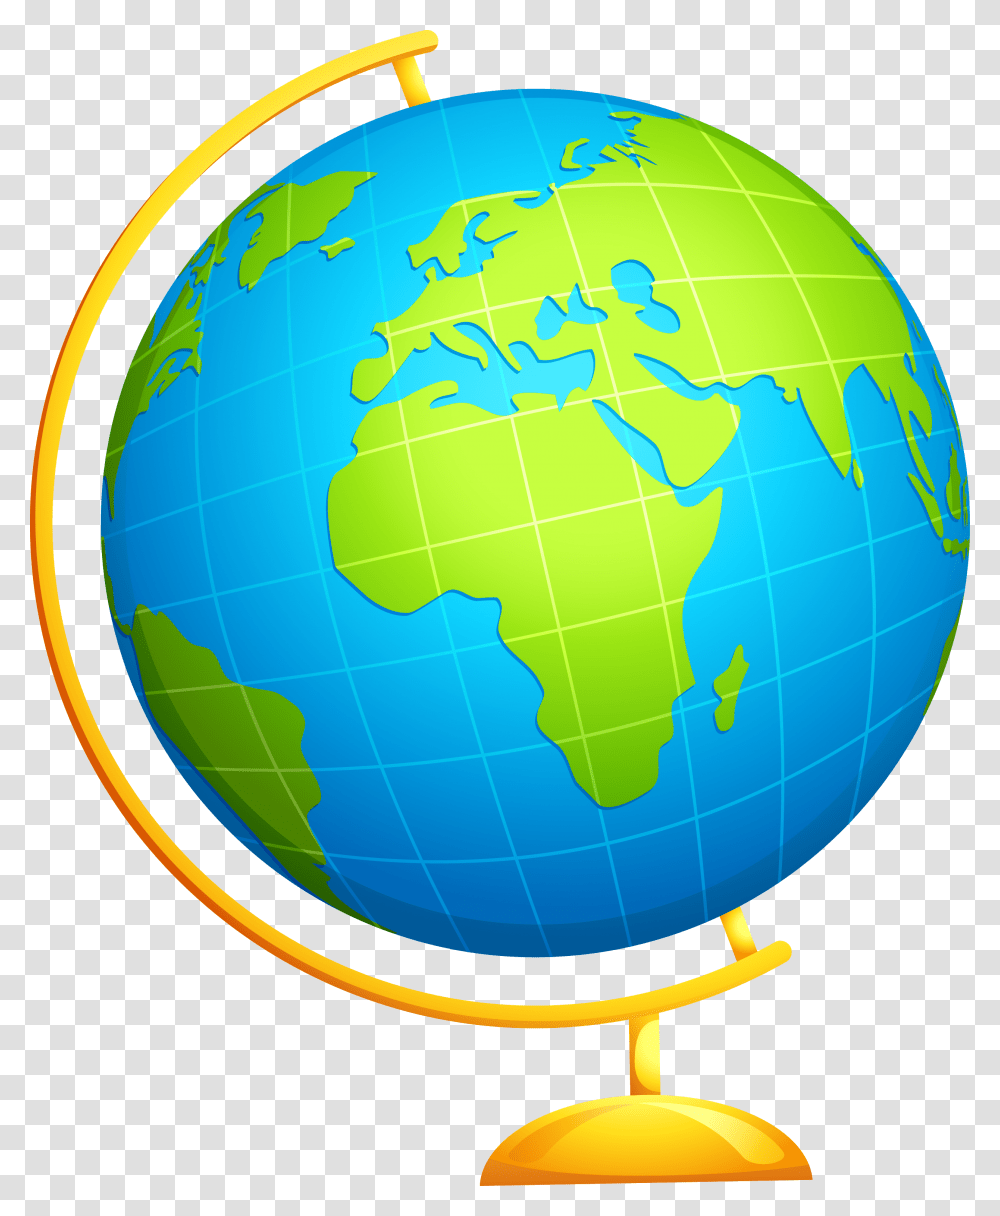 Clip Art Portable Network Graphics Globe Image Geography, Balloon, Outer Space, Astronomy, Universe Transparent Png